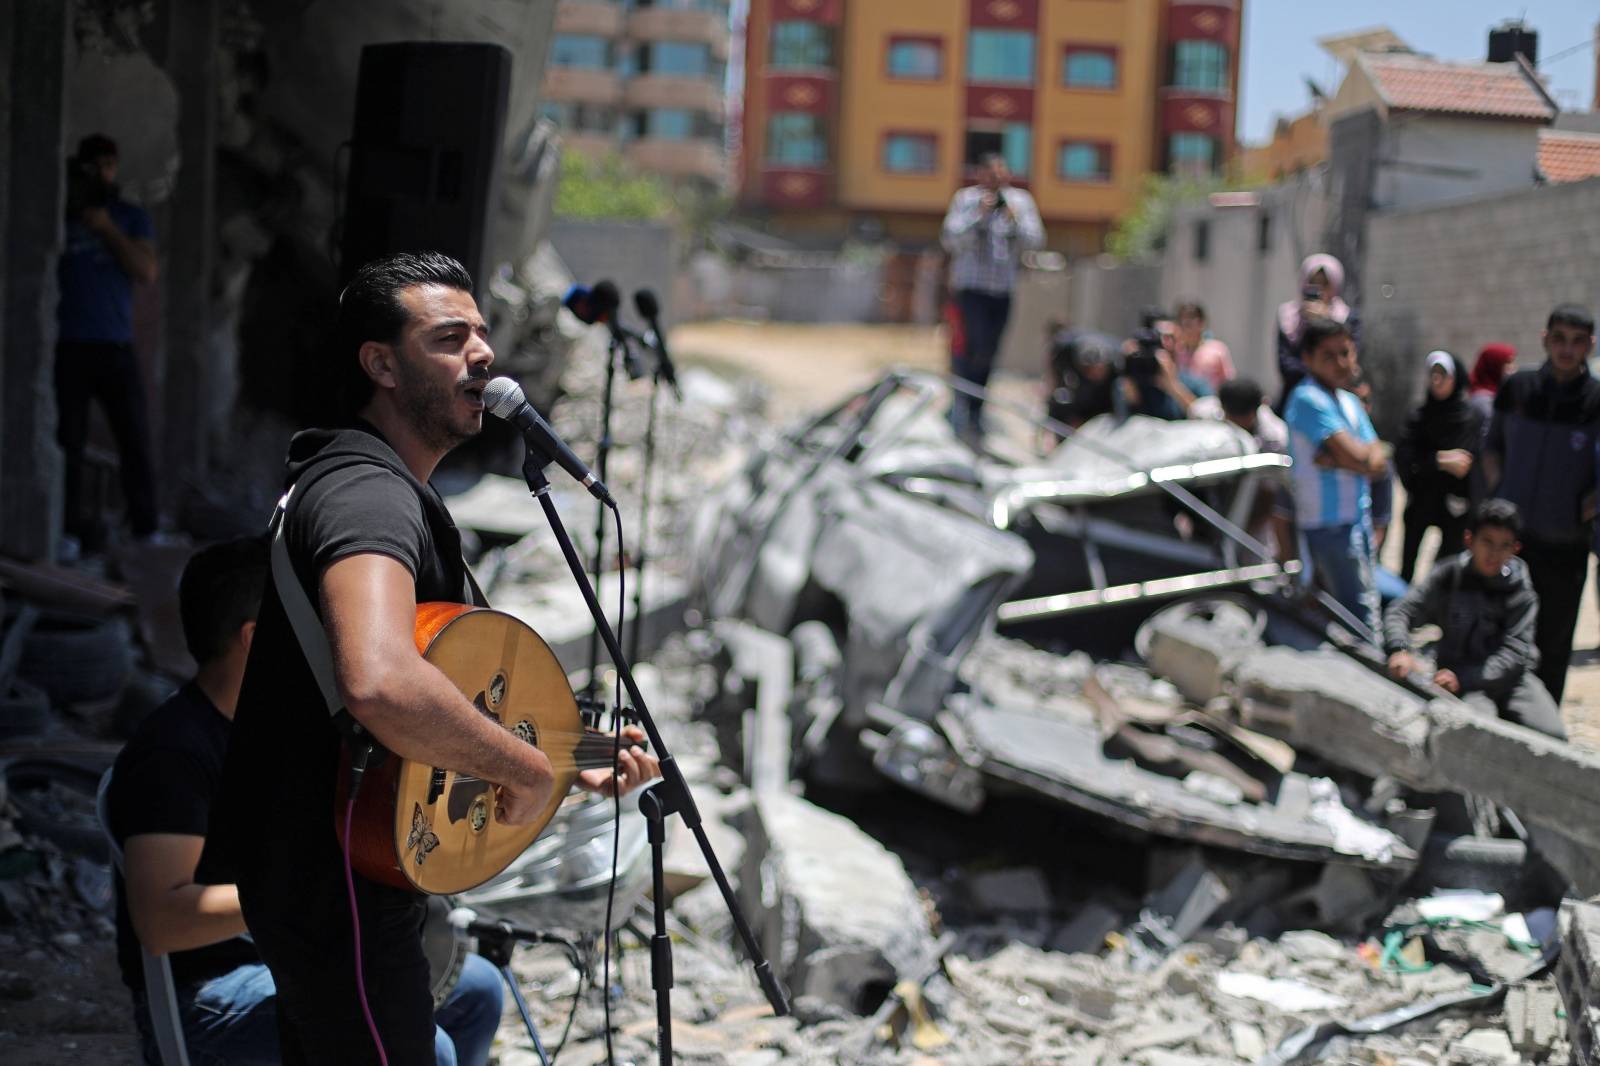 Palestinian singer performs during a musical event calling to boycott the Eurovision Song Contest hosted by Israel, in Gaza City